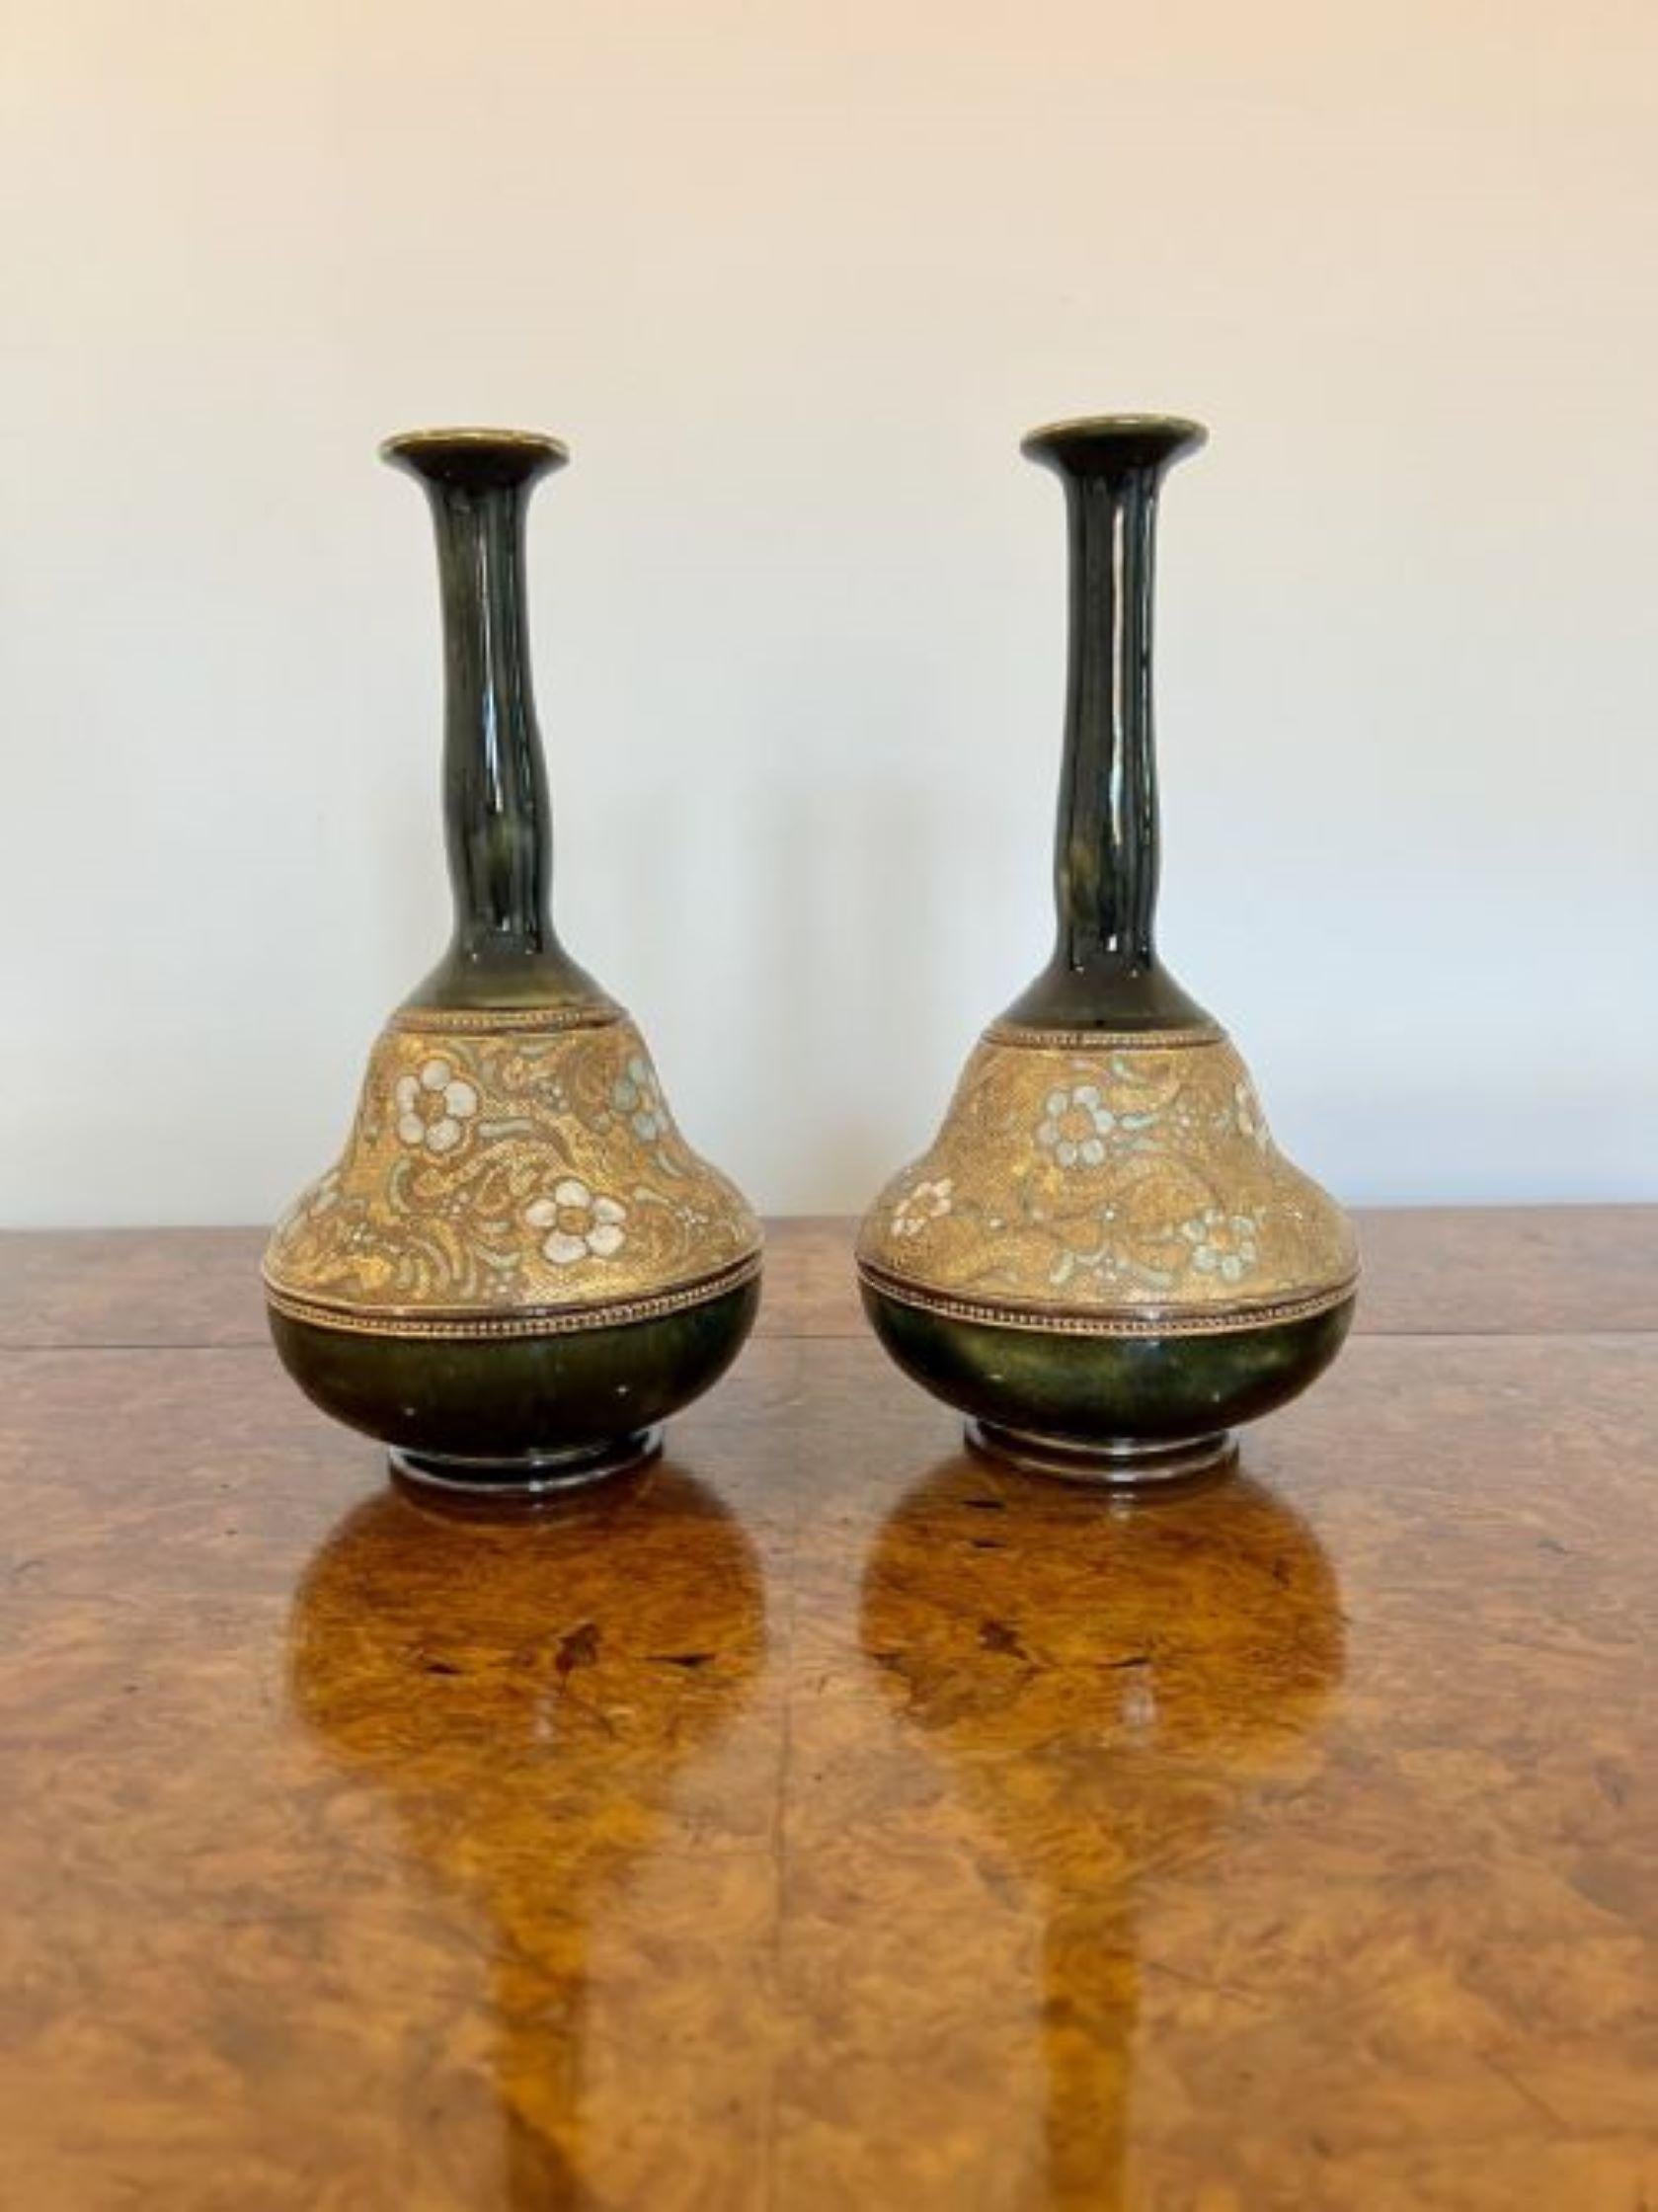 Unusual shaped pair of quality antique Doulton vases having a lovely pair of unusual shaped antique Royal Doulton vases having a band of green and white flowers on a golden background to the centre of the vase and a dark green glaze with gold